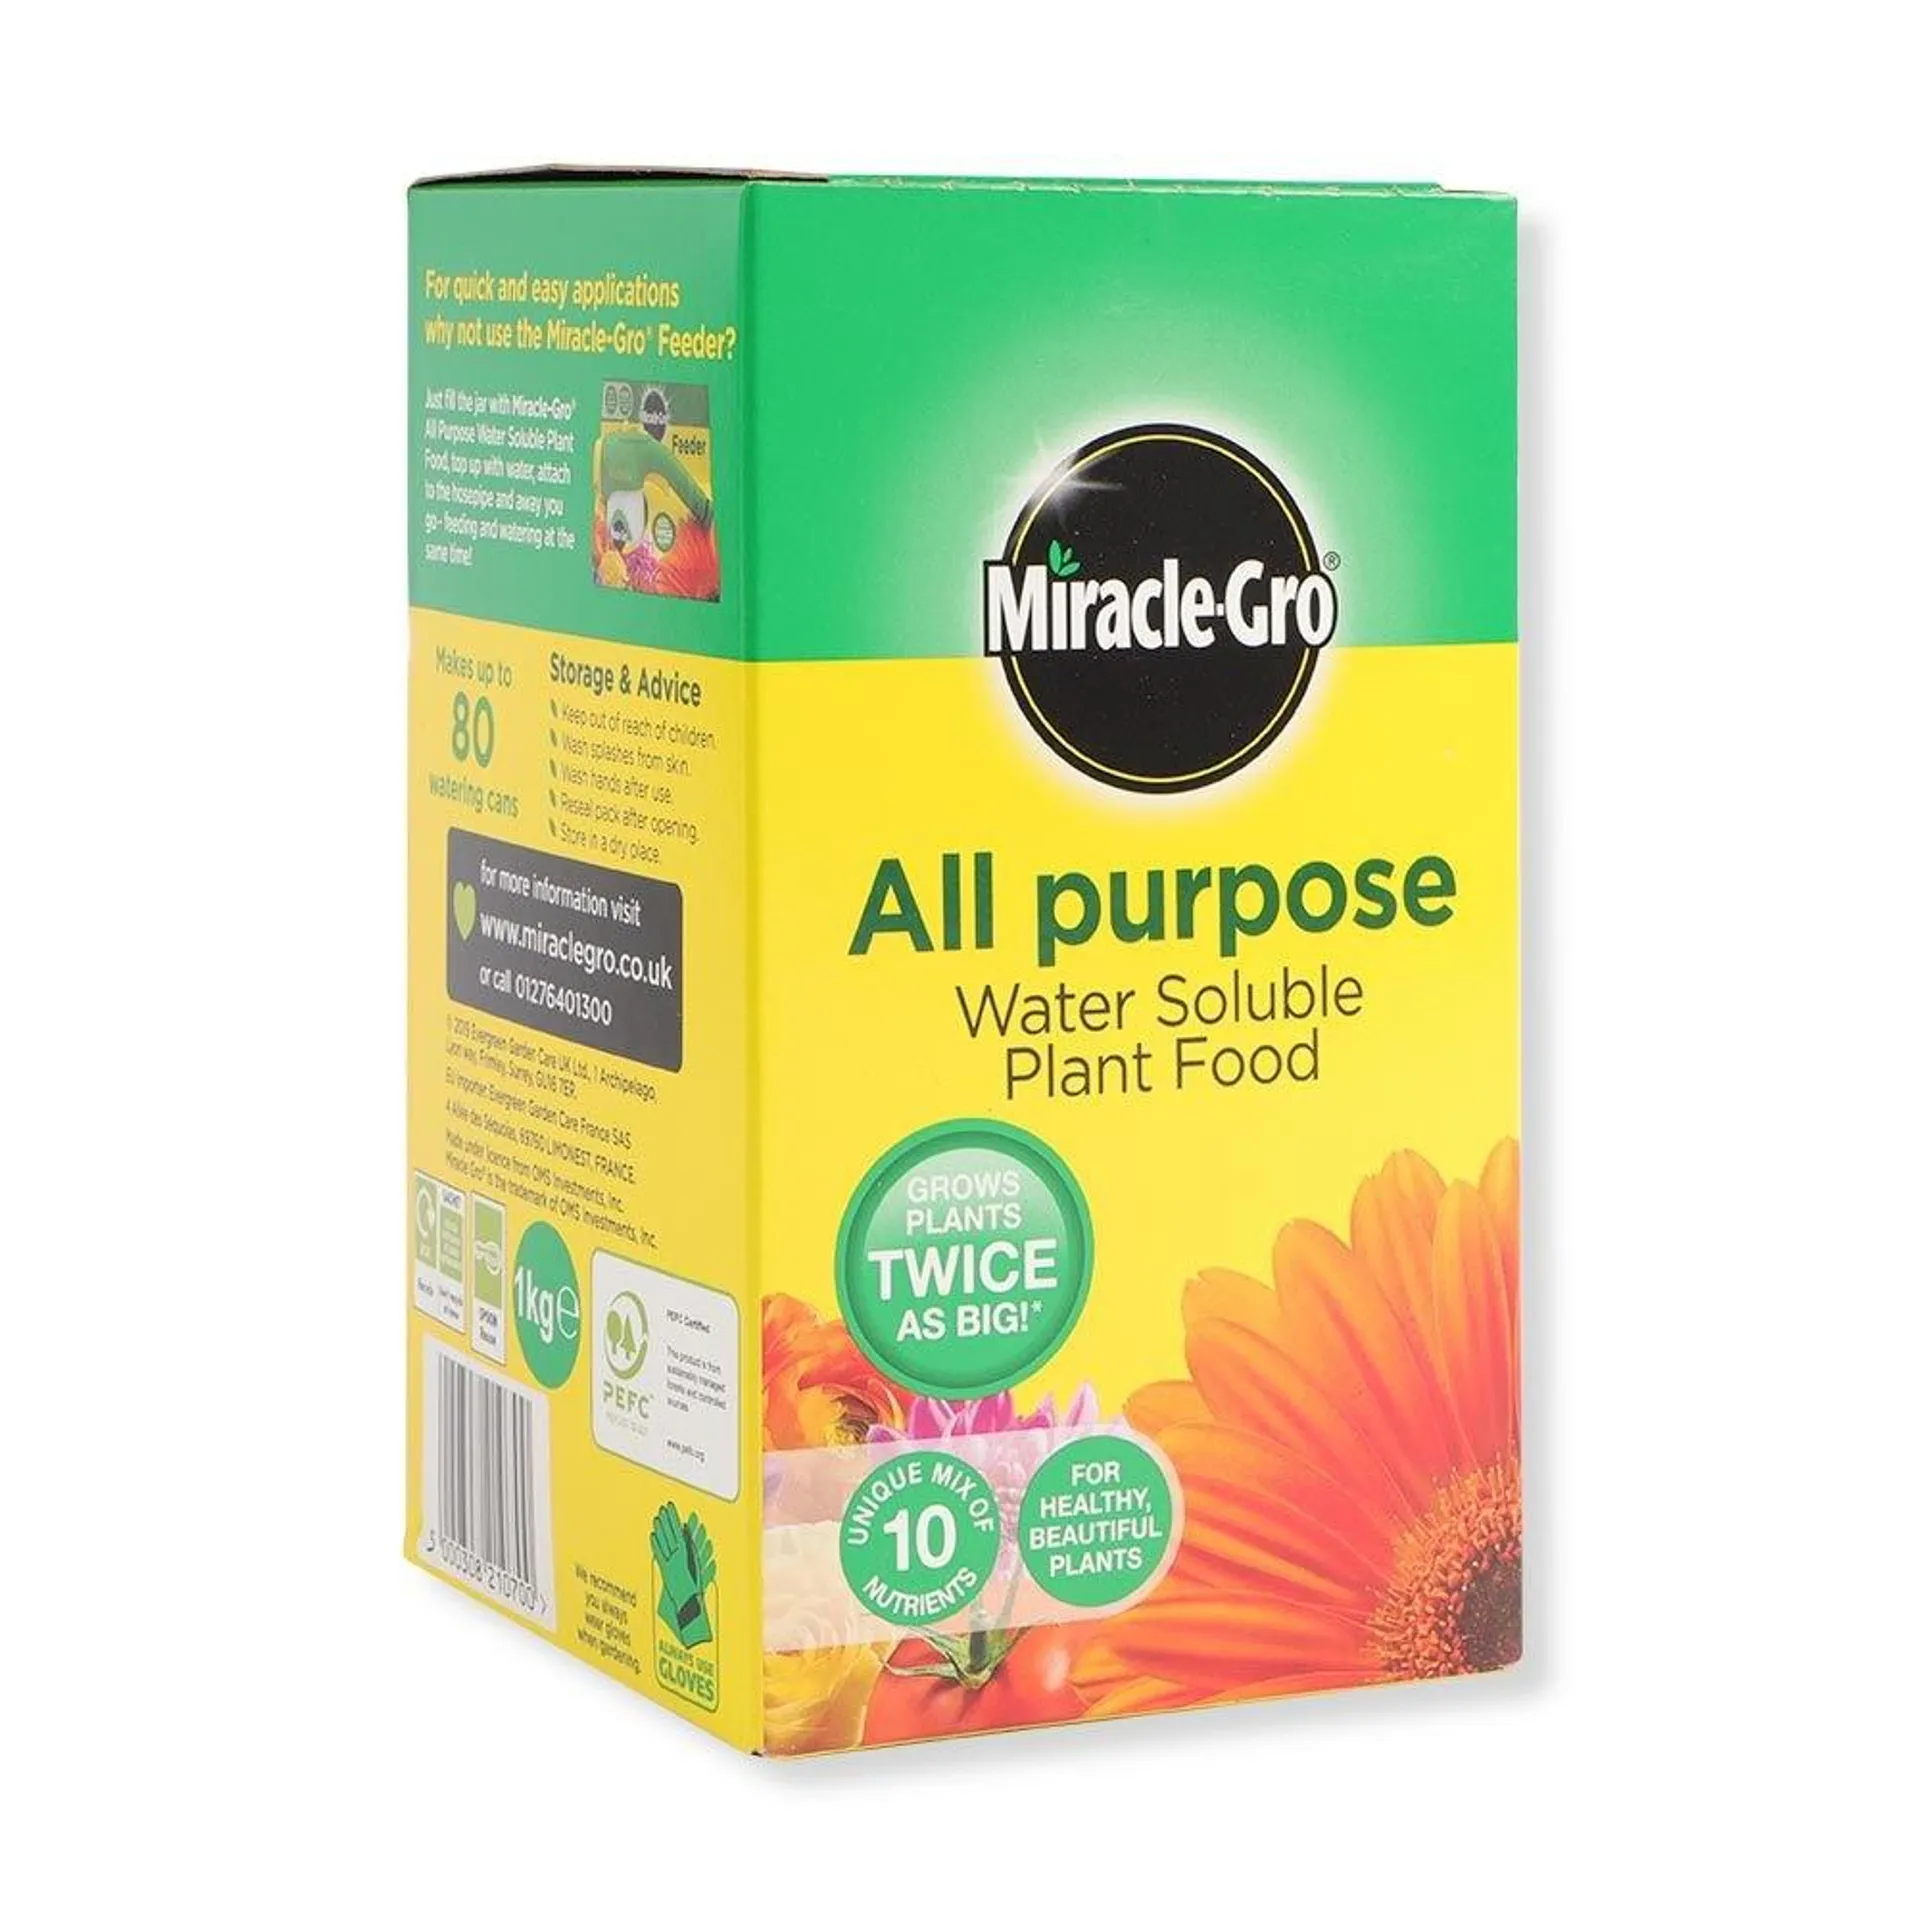 MIRACLE-GRO ALL PURPOSE WATER SOLUBLE PLANT FOOD